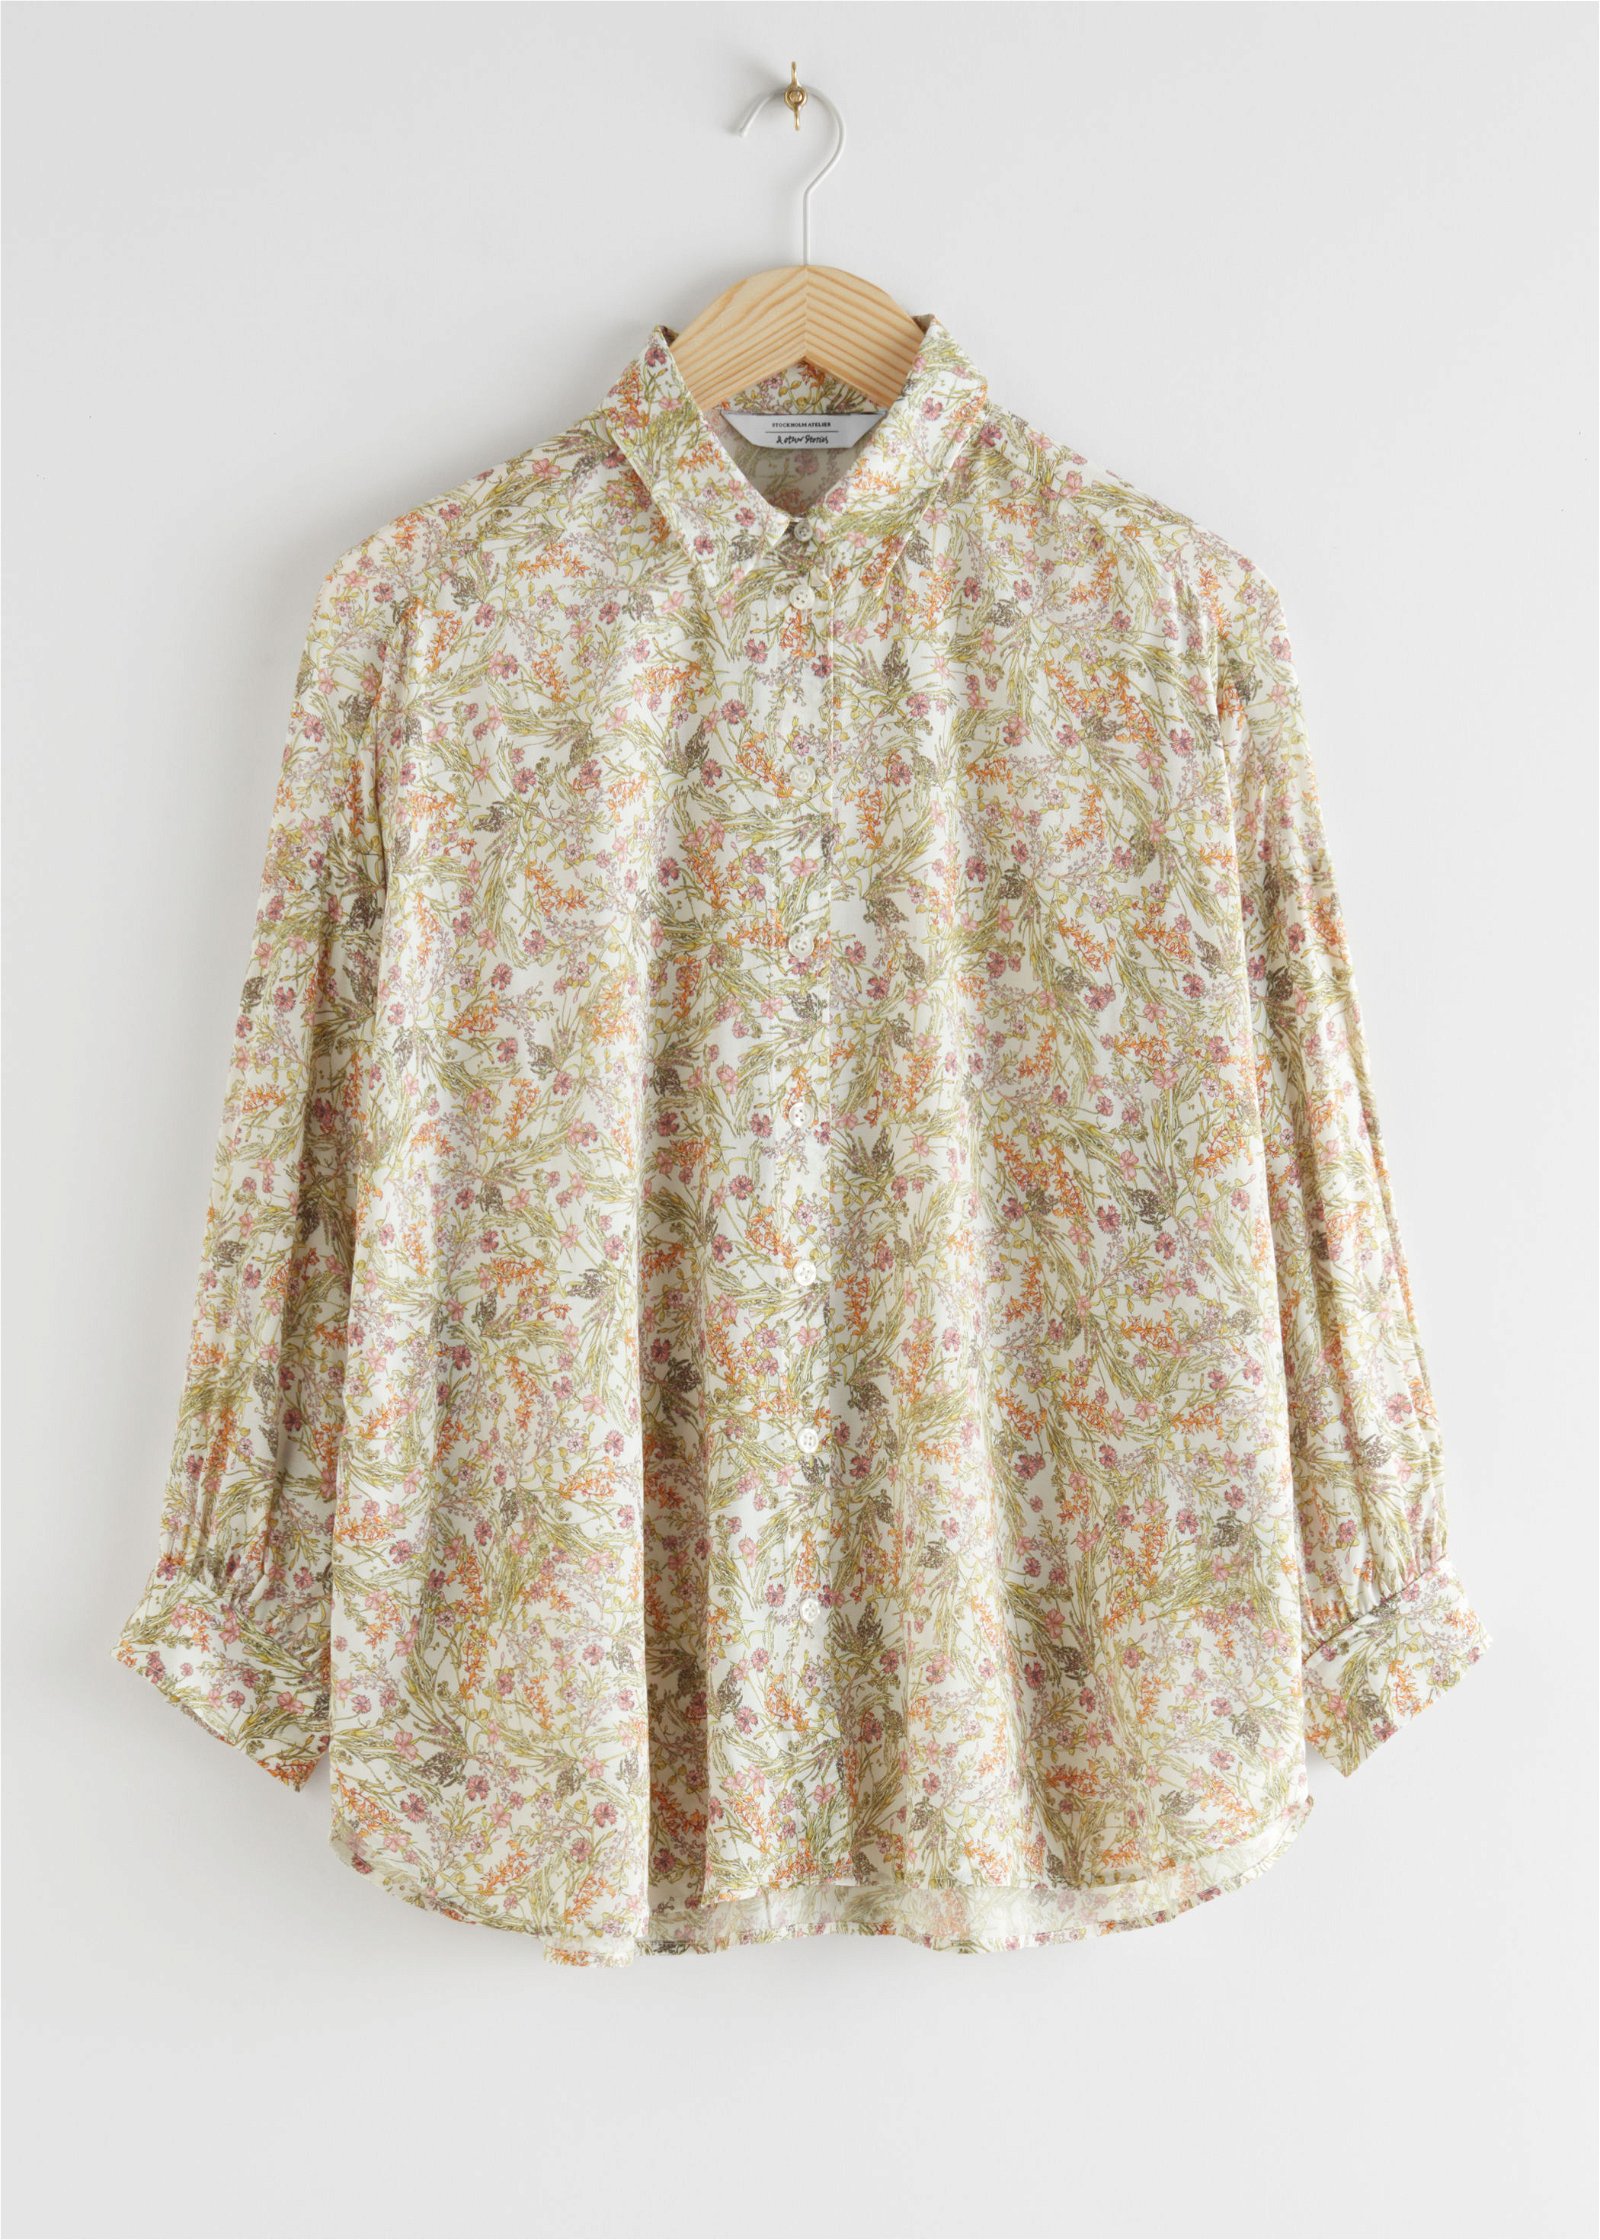 & OTHER STORIES Semi Sheer Floral Print Blouse | Endource